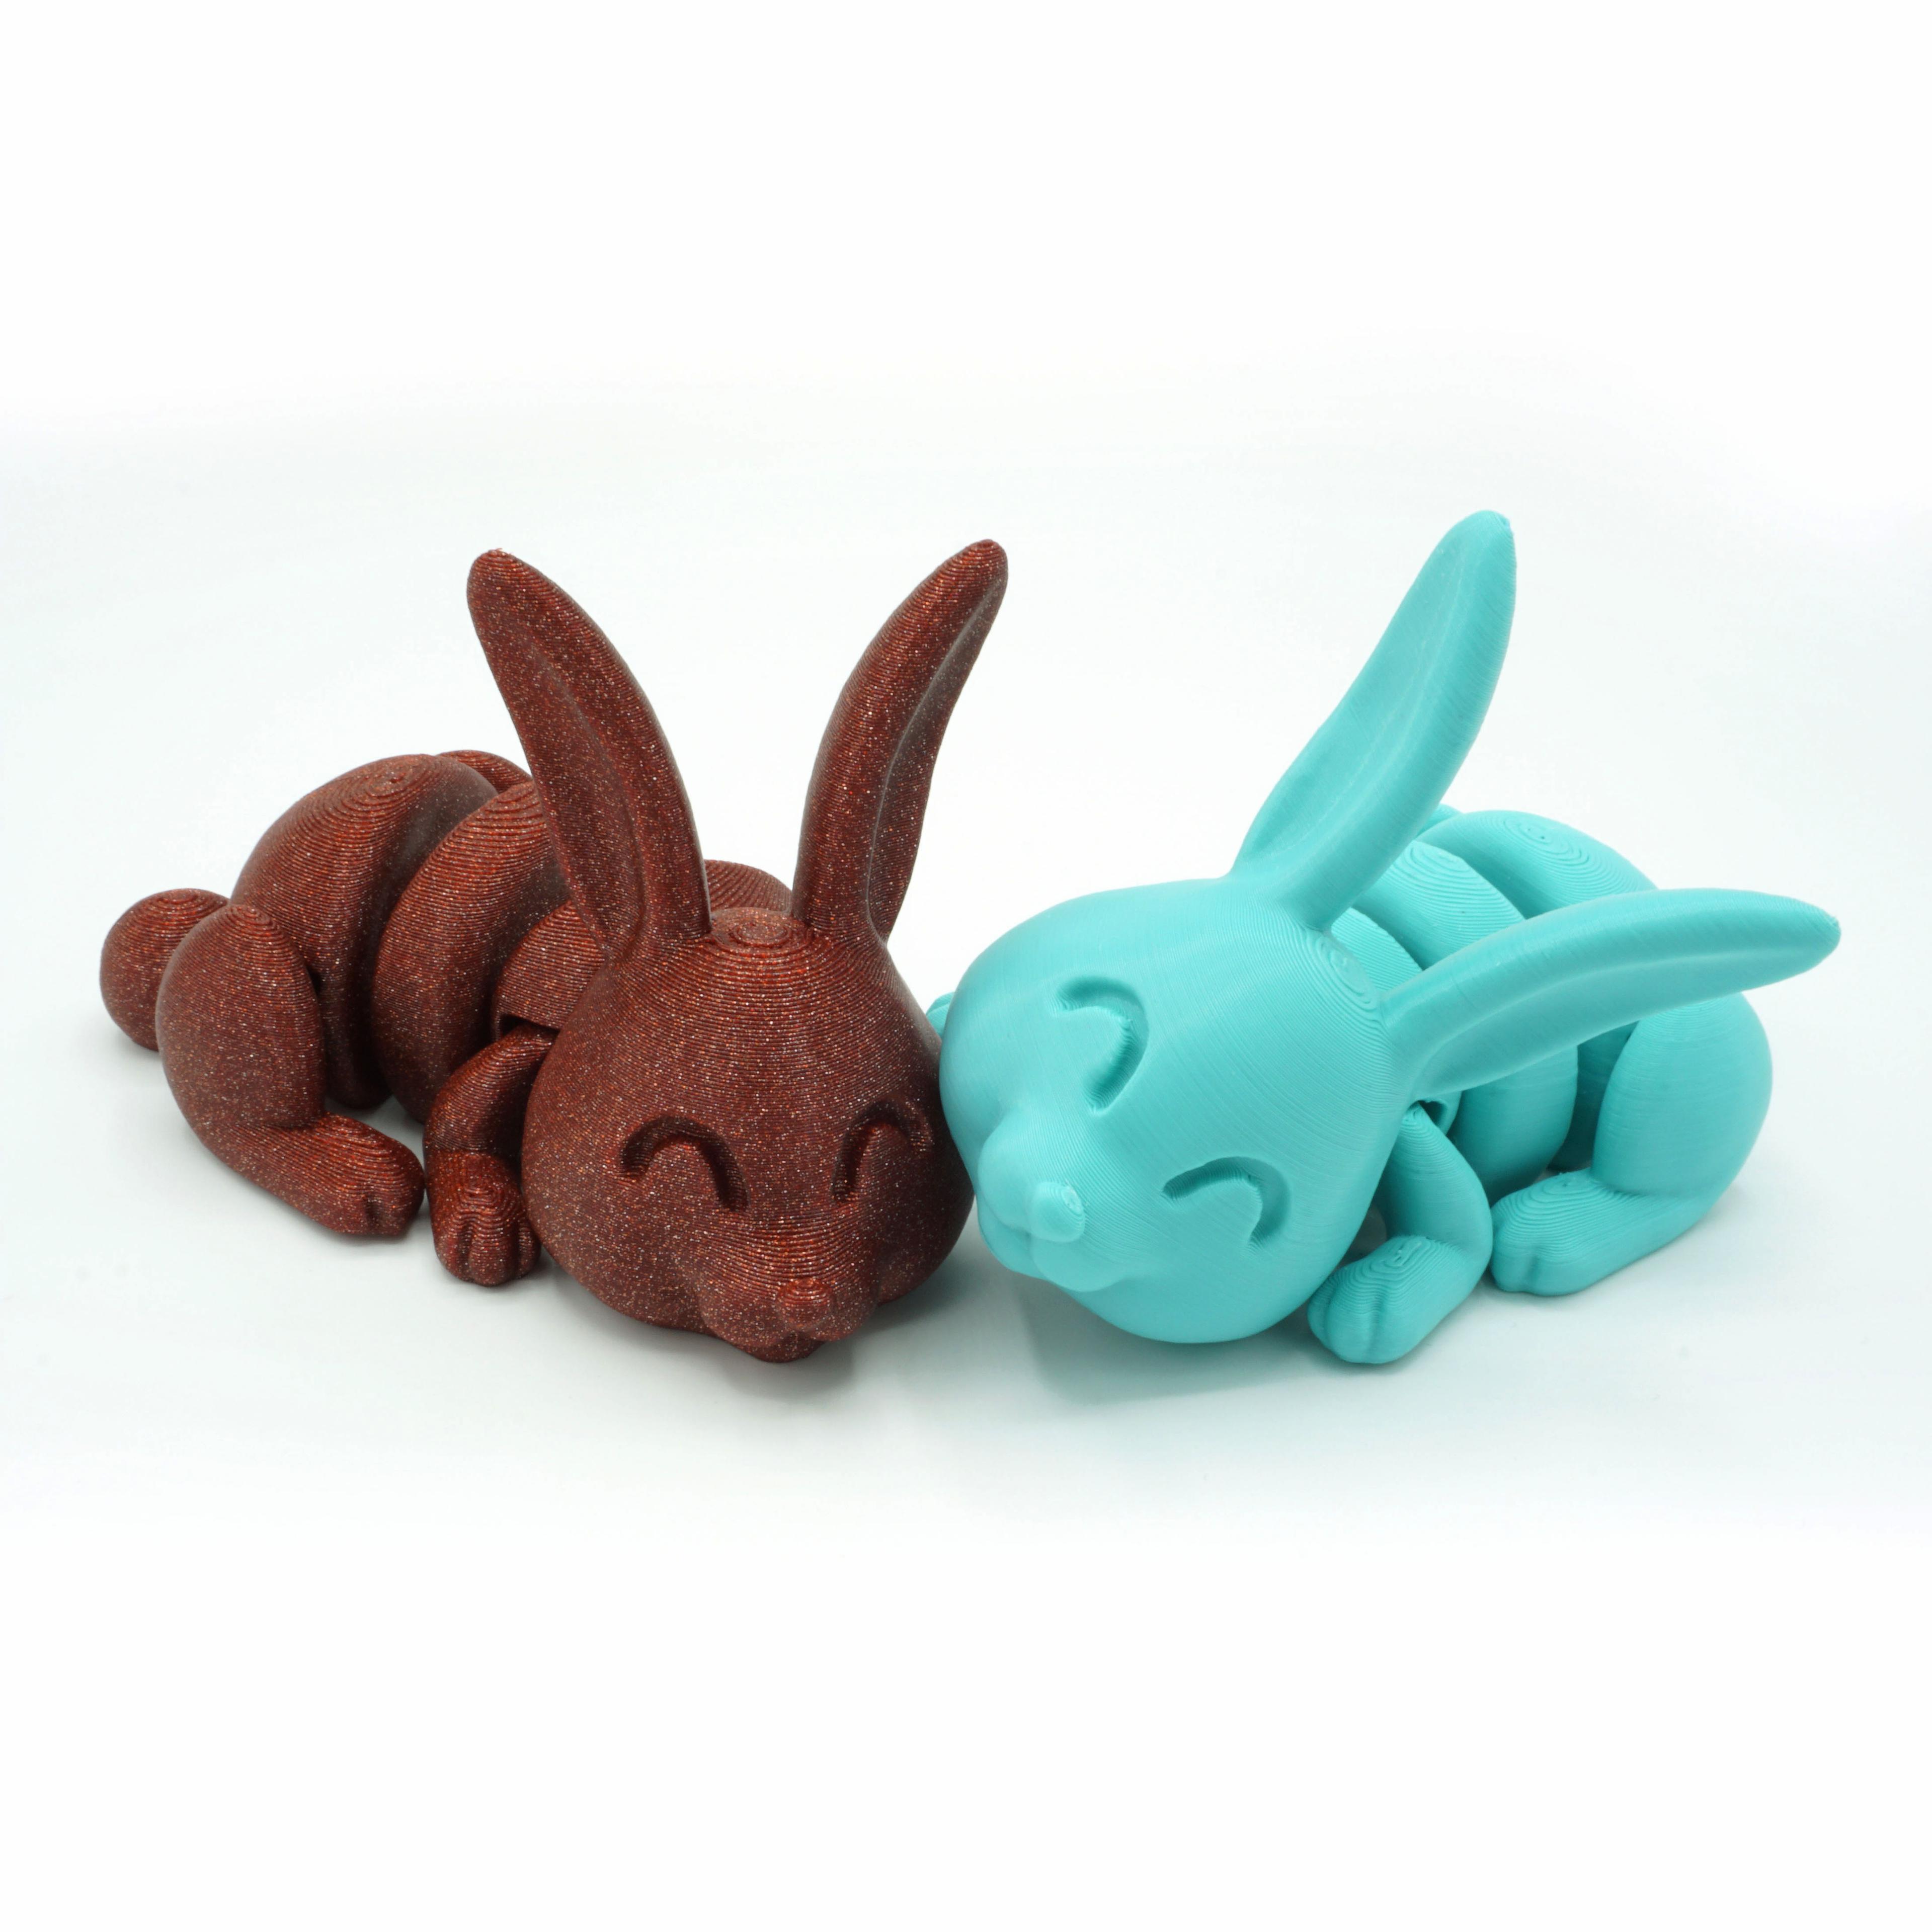 Articulated Bunny 3d model